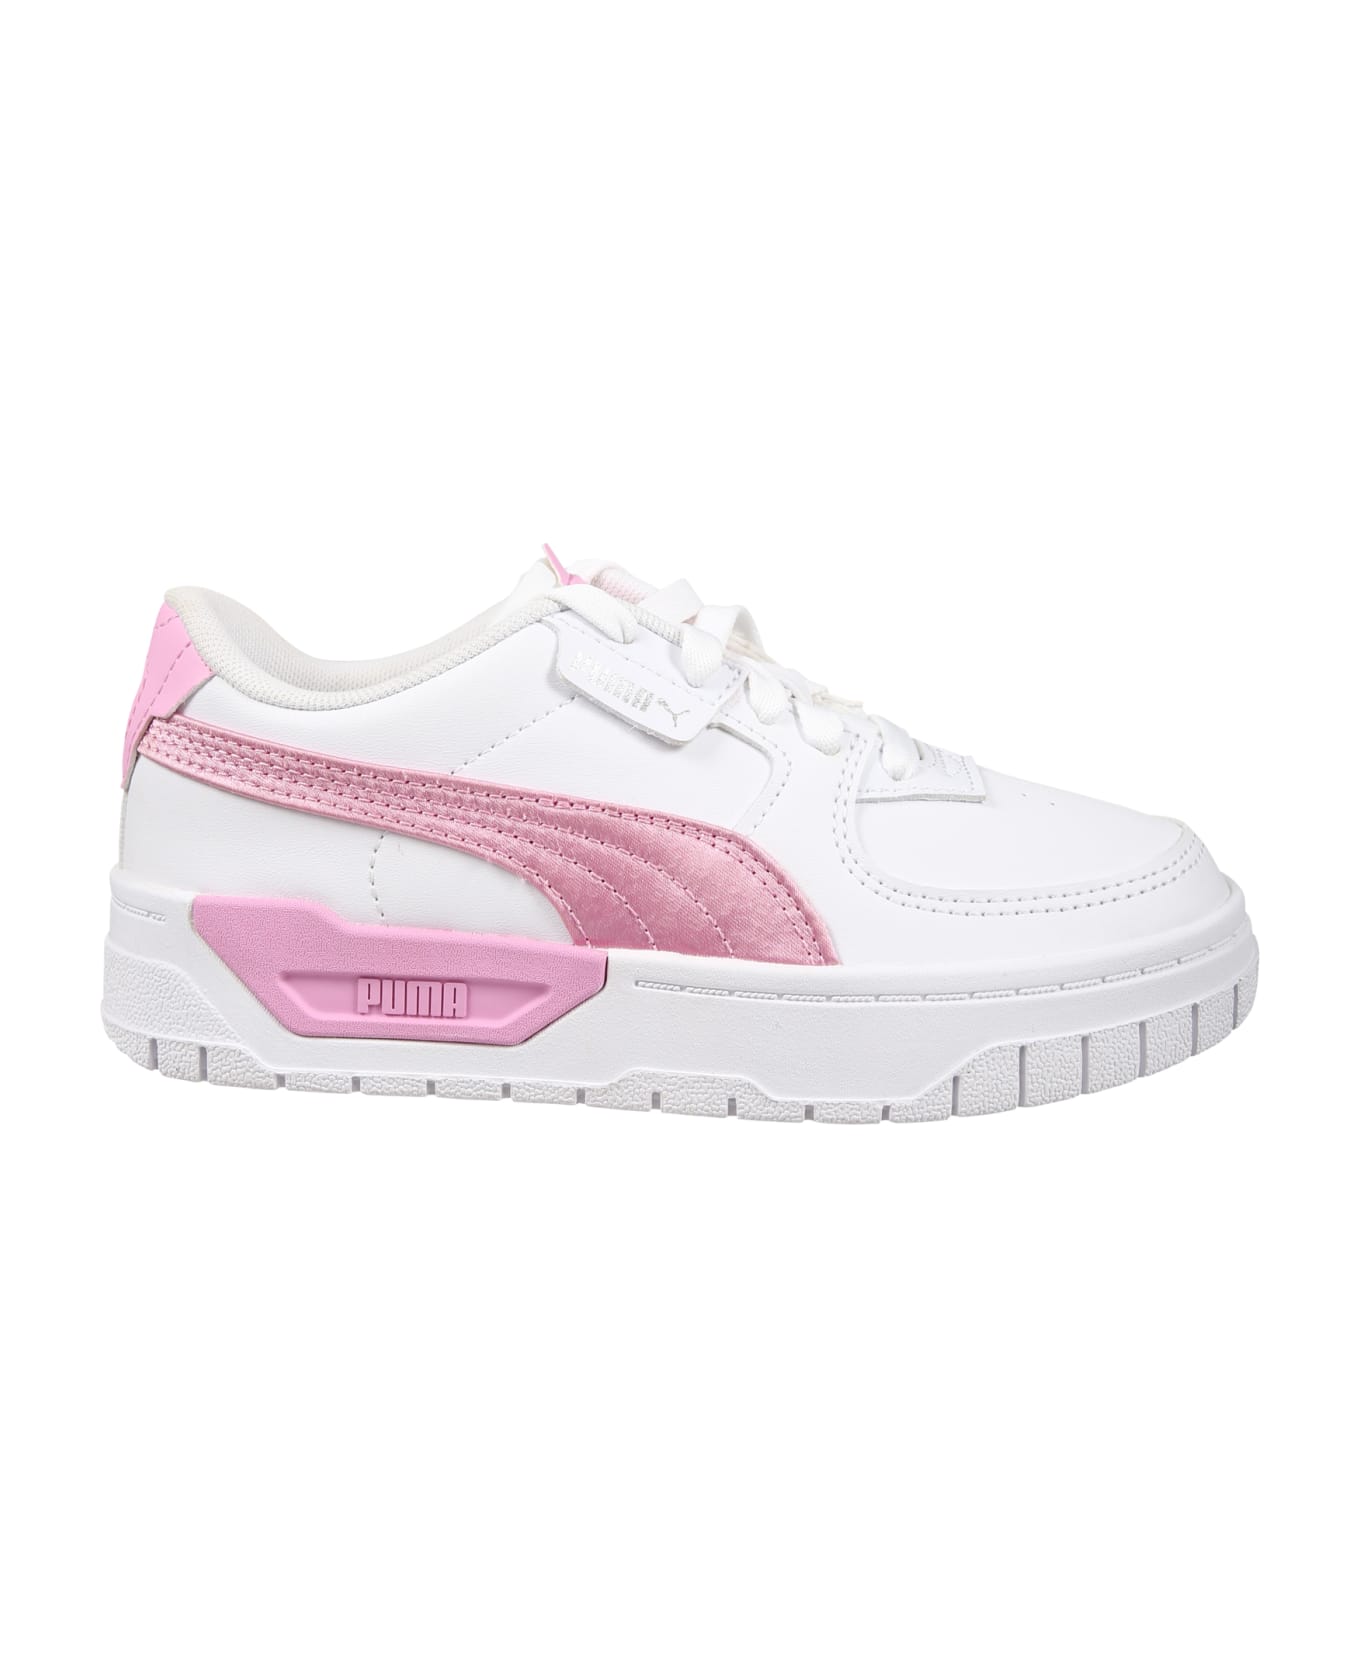 Puma White Sneakers For Girl With Logo - White シューズ